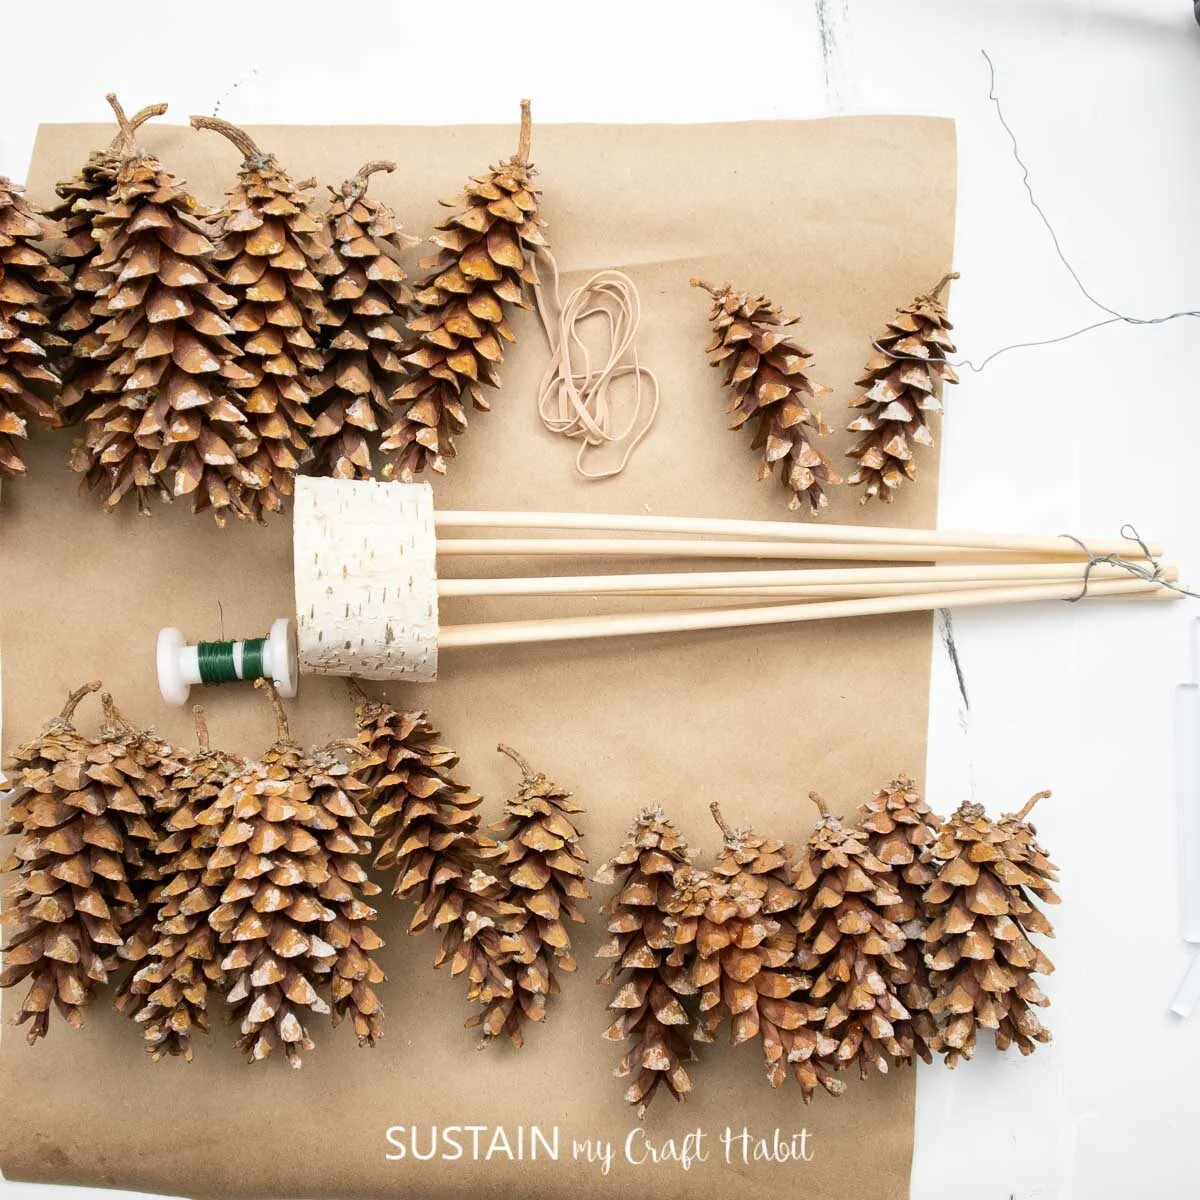 Materials needed to make Pinecone tabletop Christmas trees including pine cones, wooden dowels, rubber bands, birchwood and floral wire.